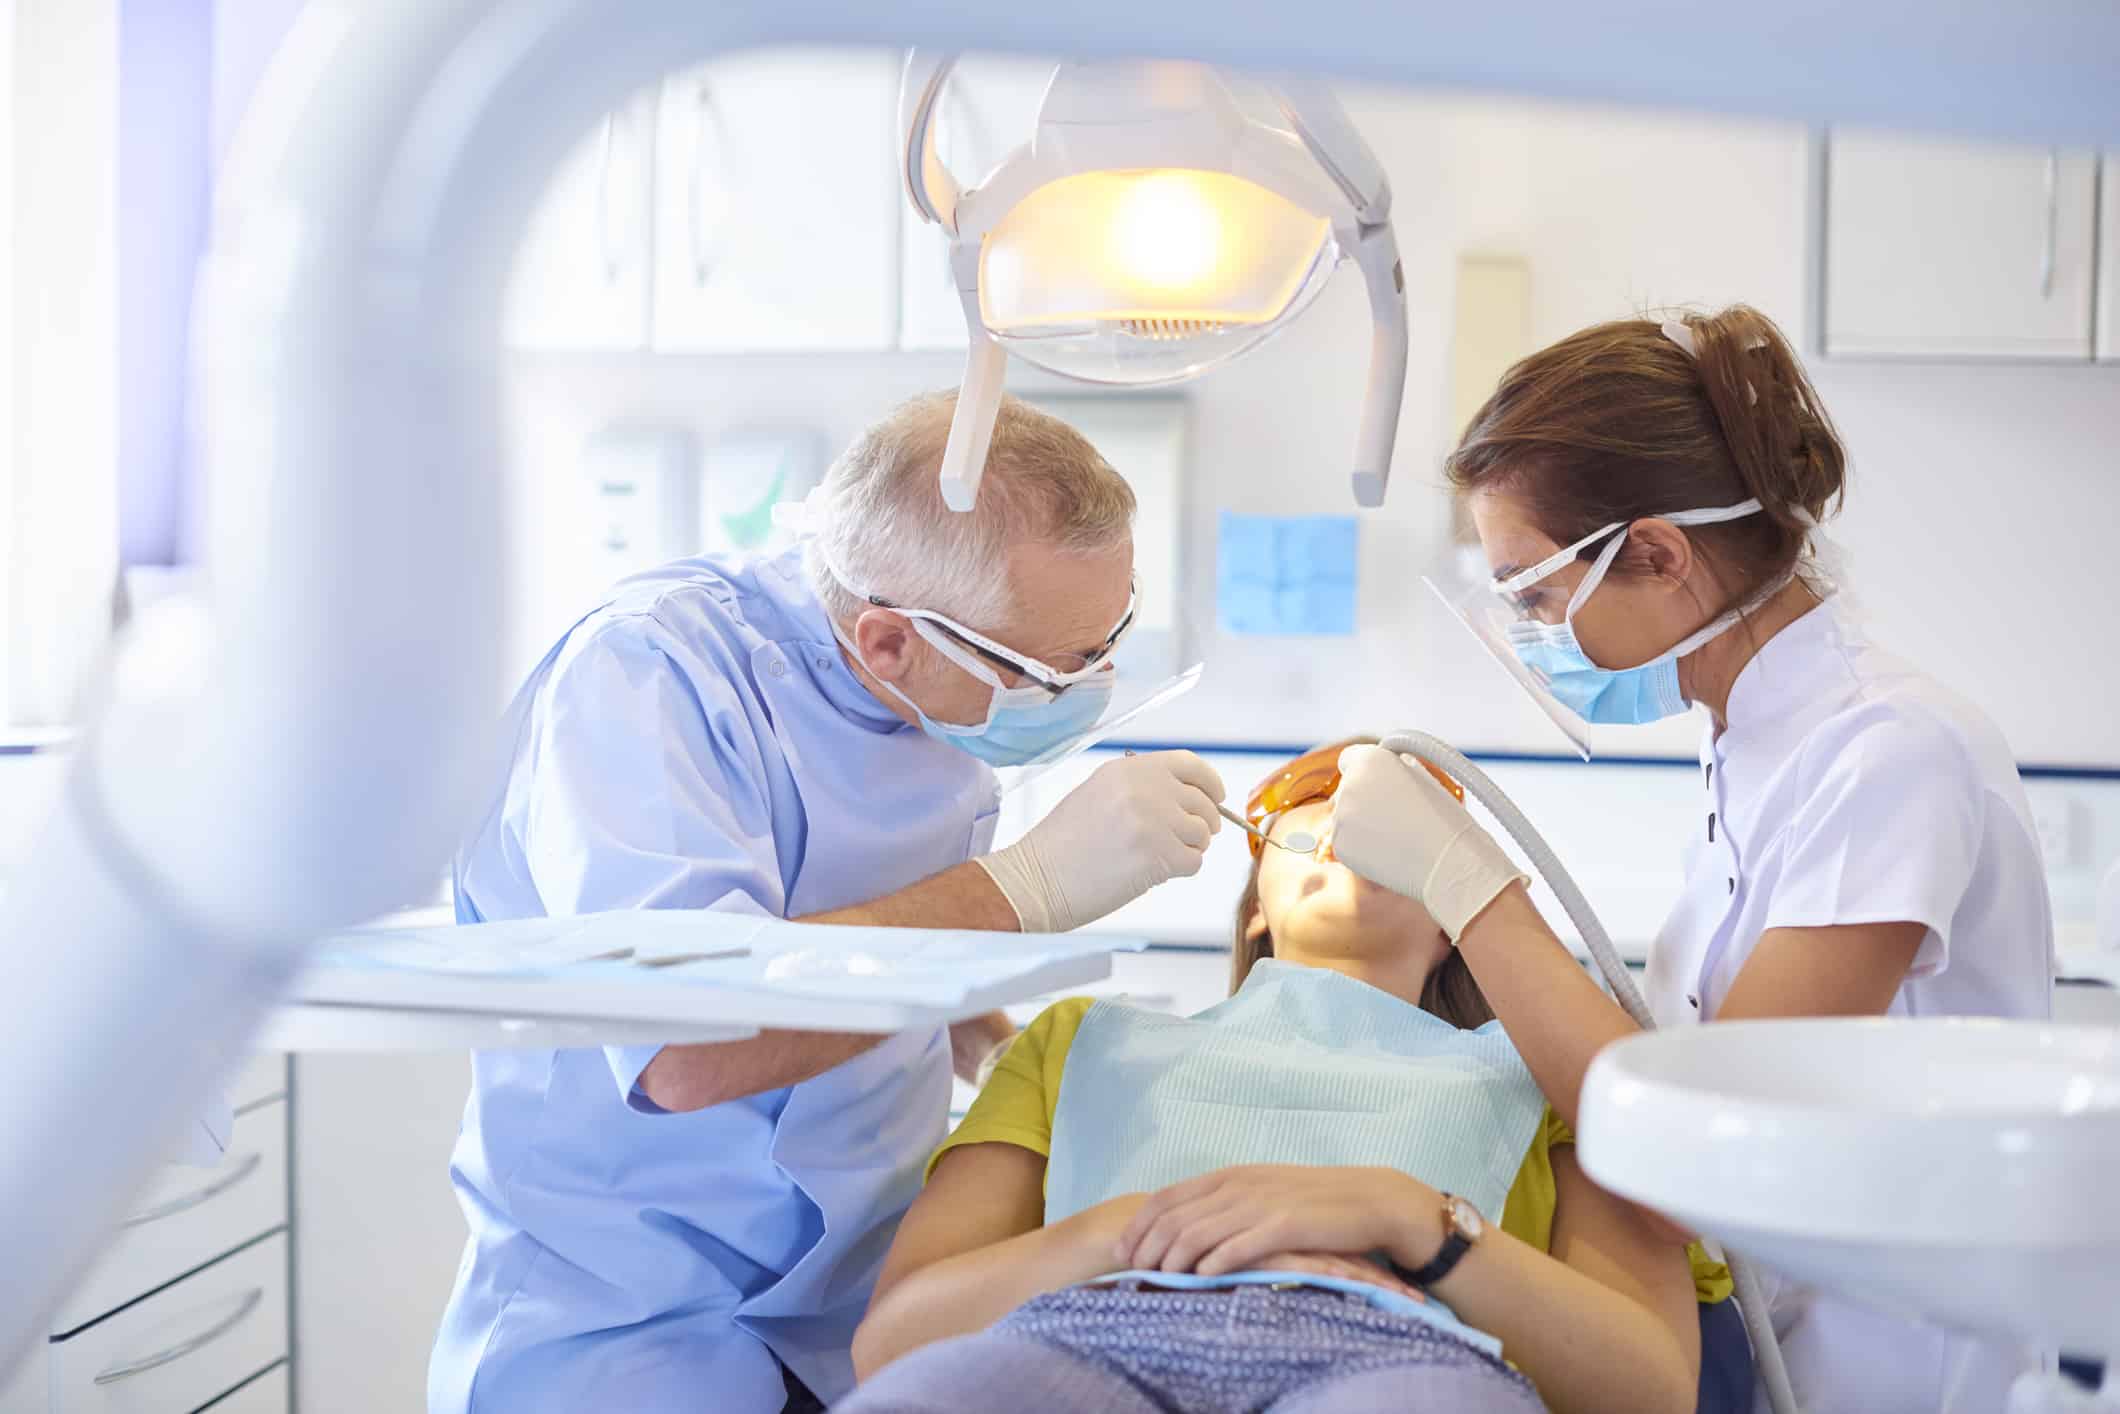 do you need anesthesia while getting dental implants